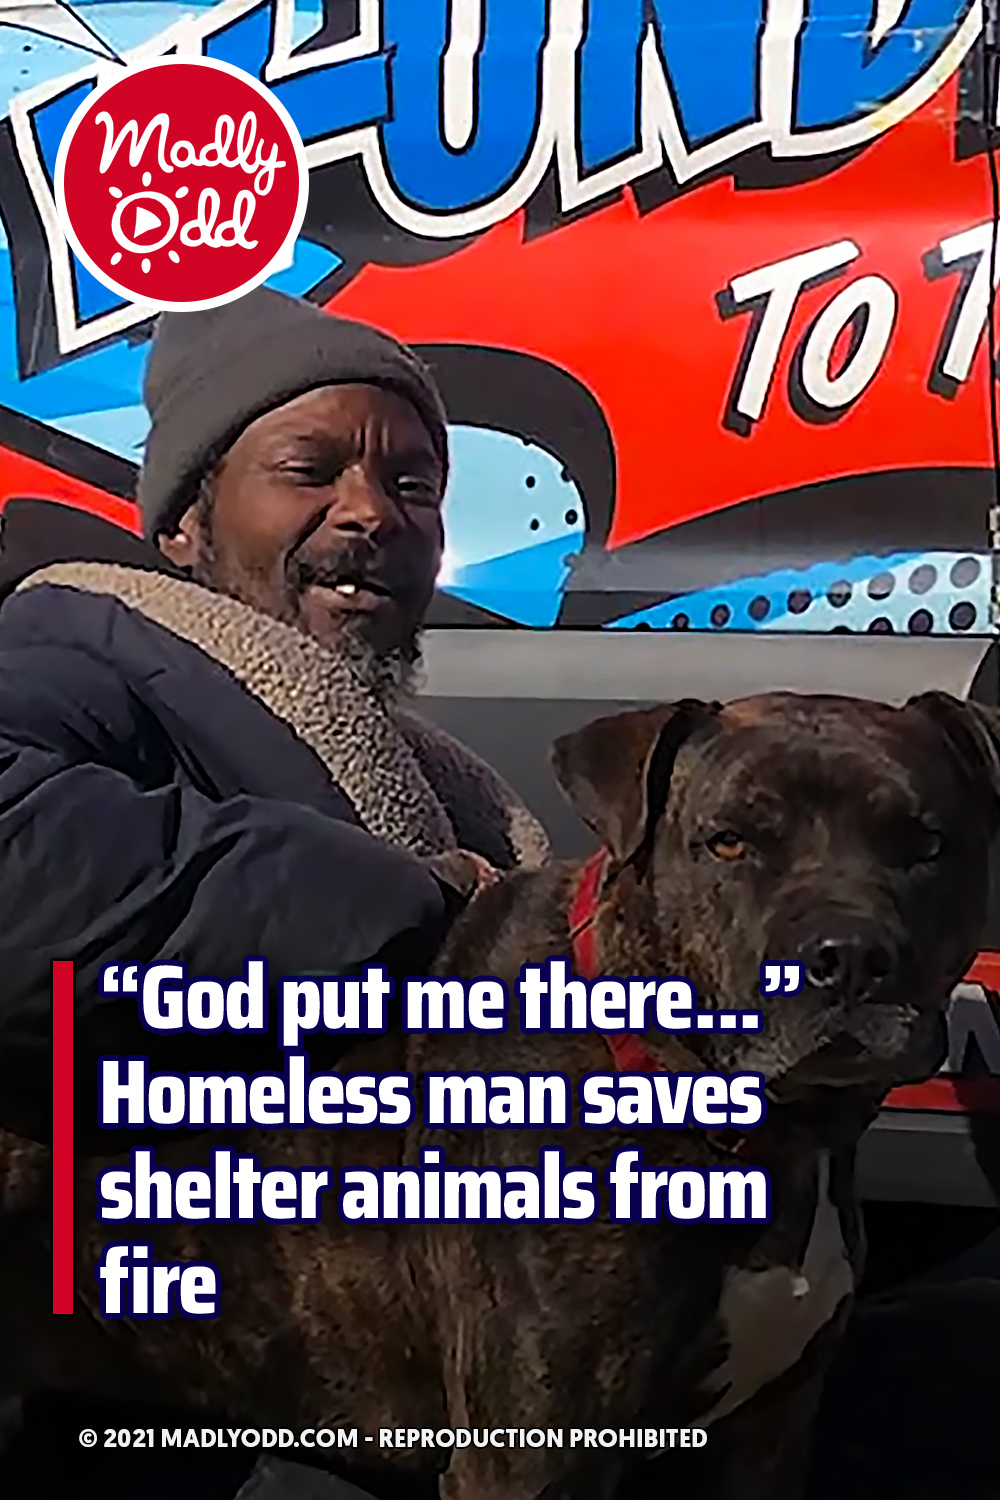 “God put me there...” Homeless man saves shelter animals from fire